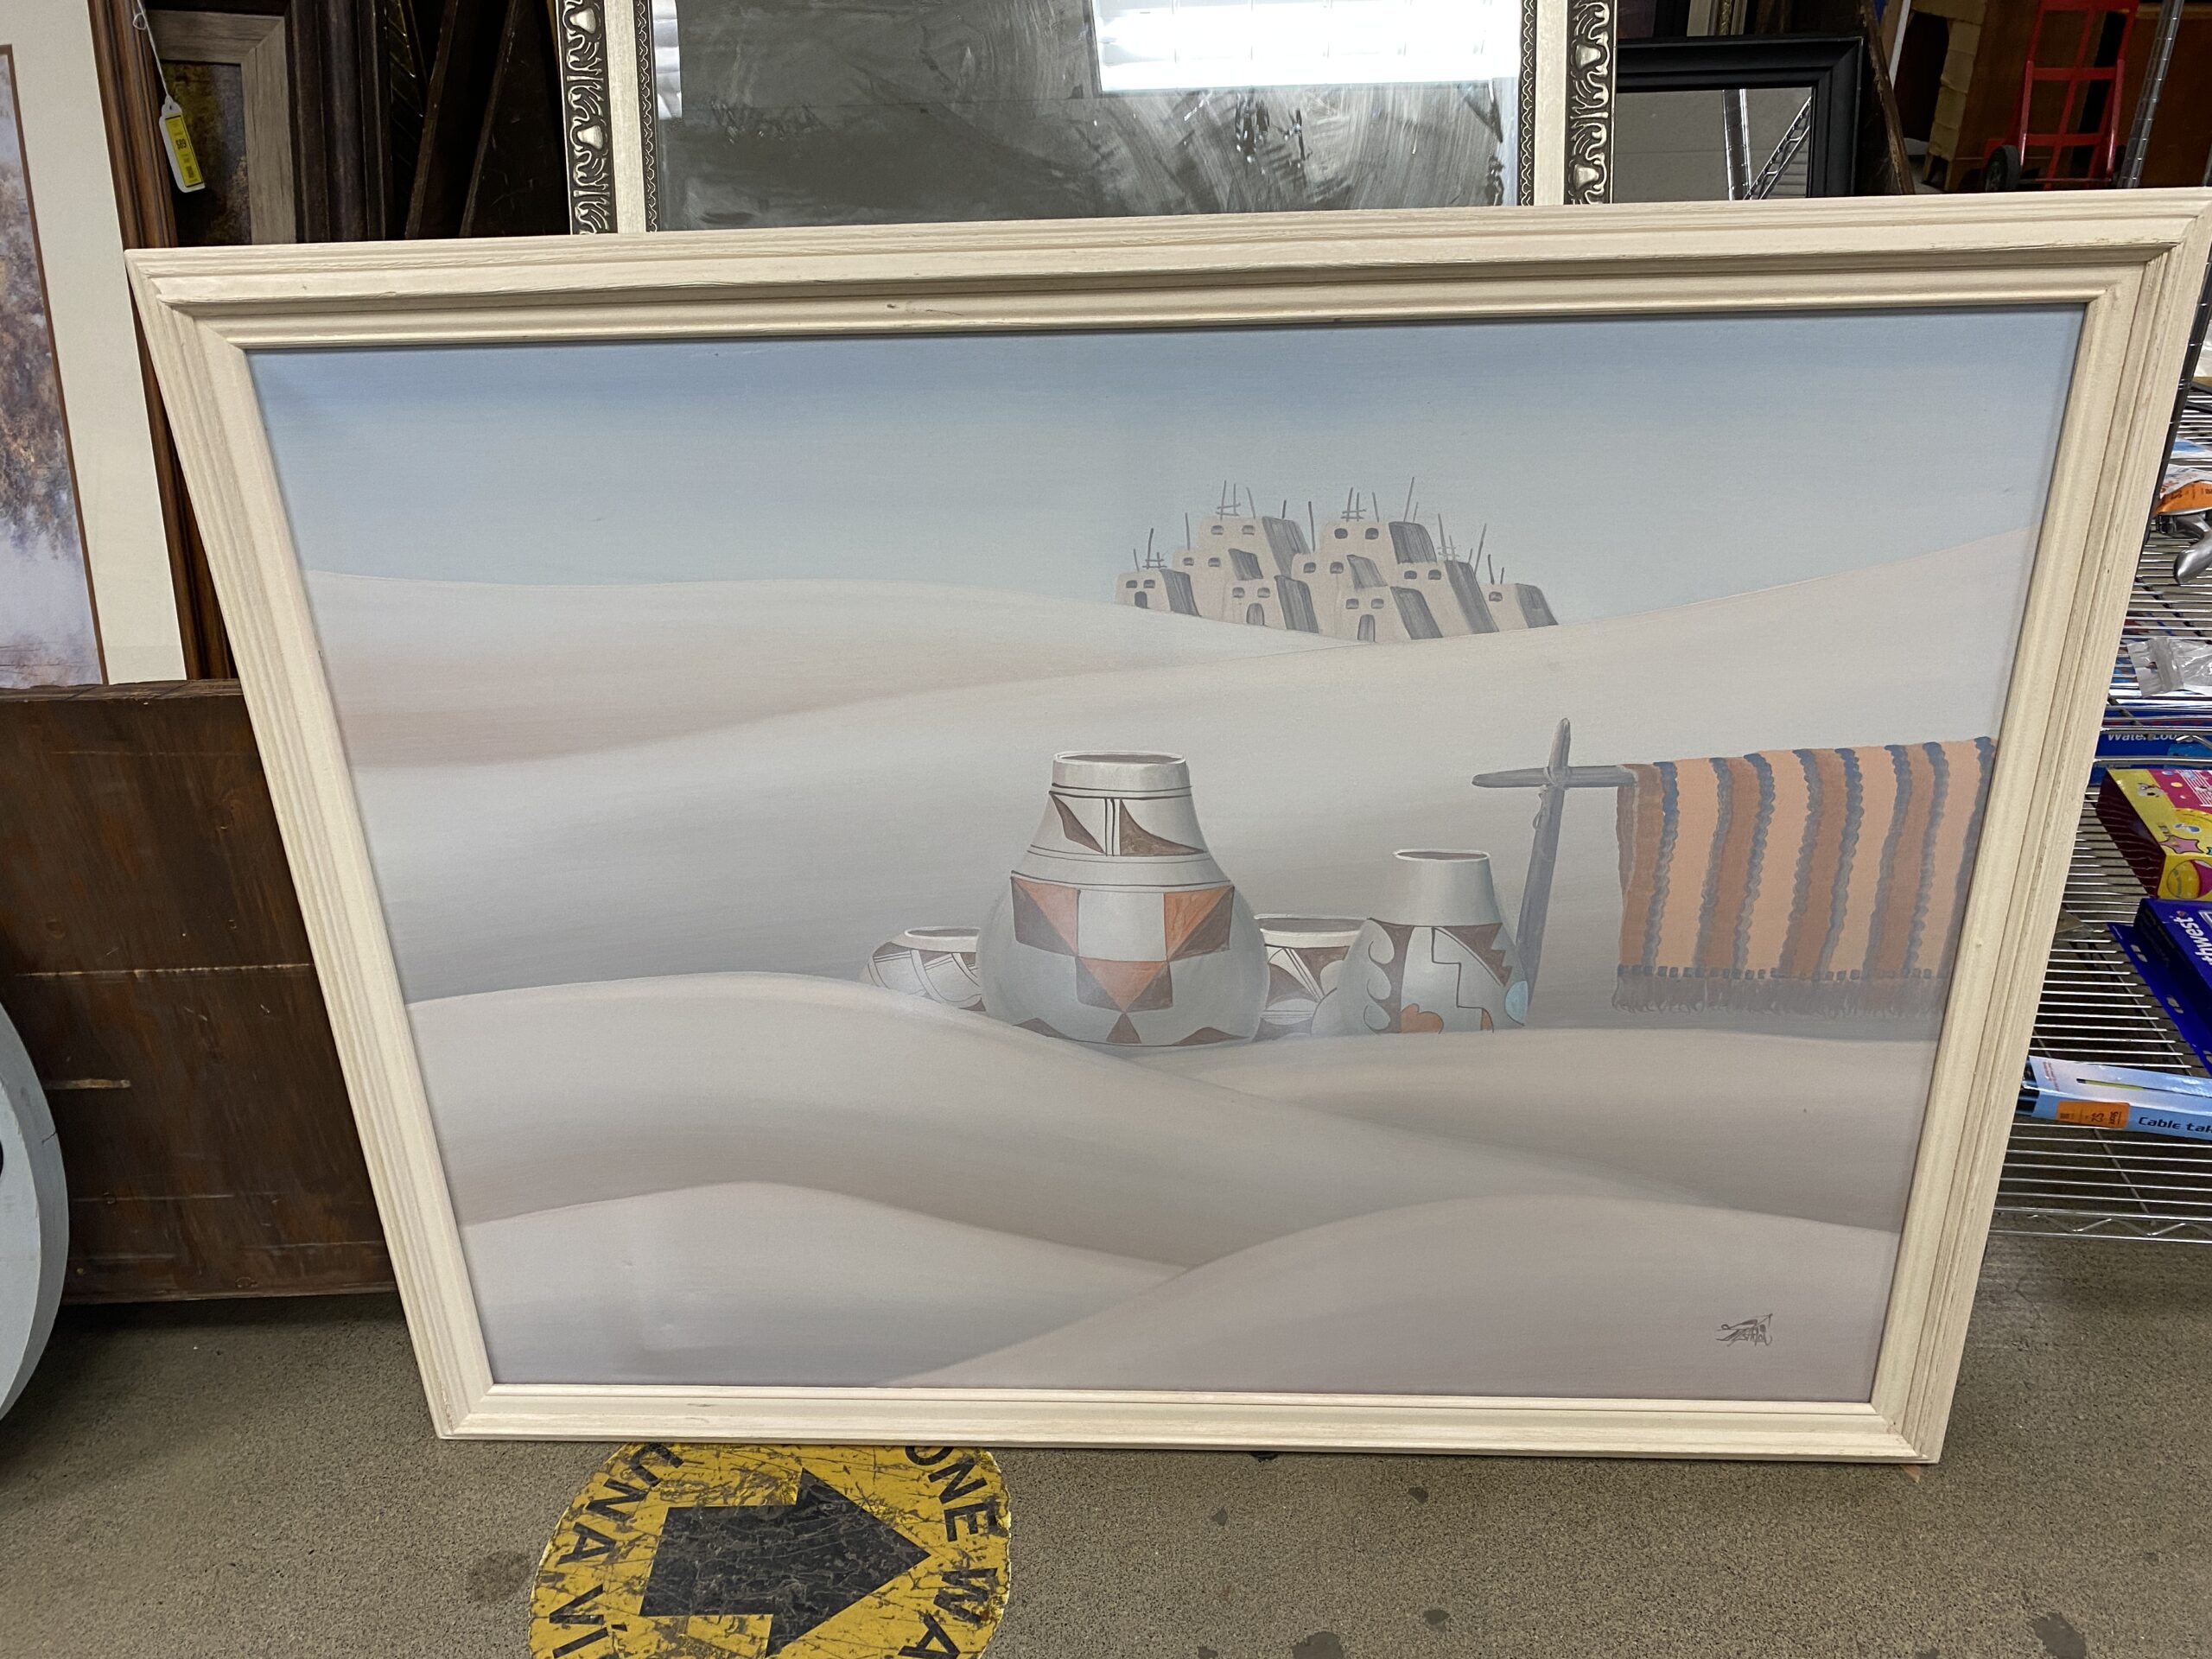 Signed Original Canvas Painting by Jose Aricopa “Clay Pots in Desert Sand”